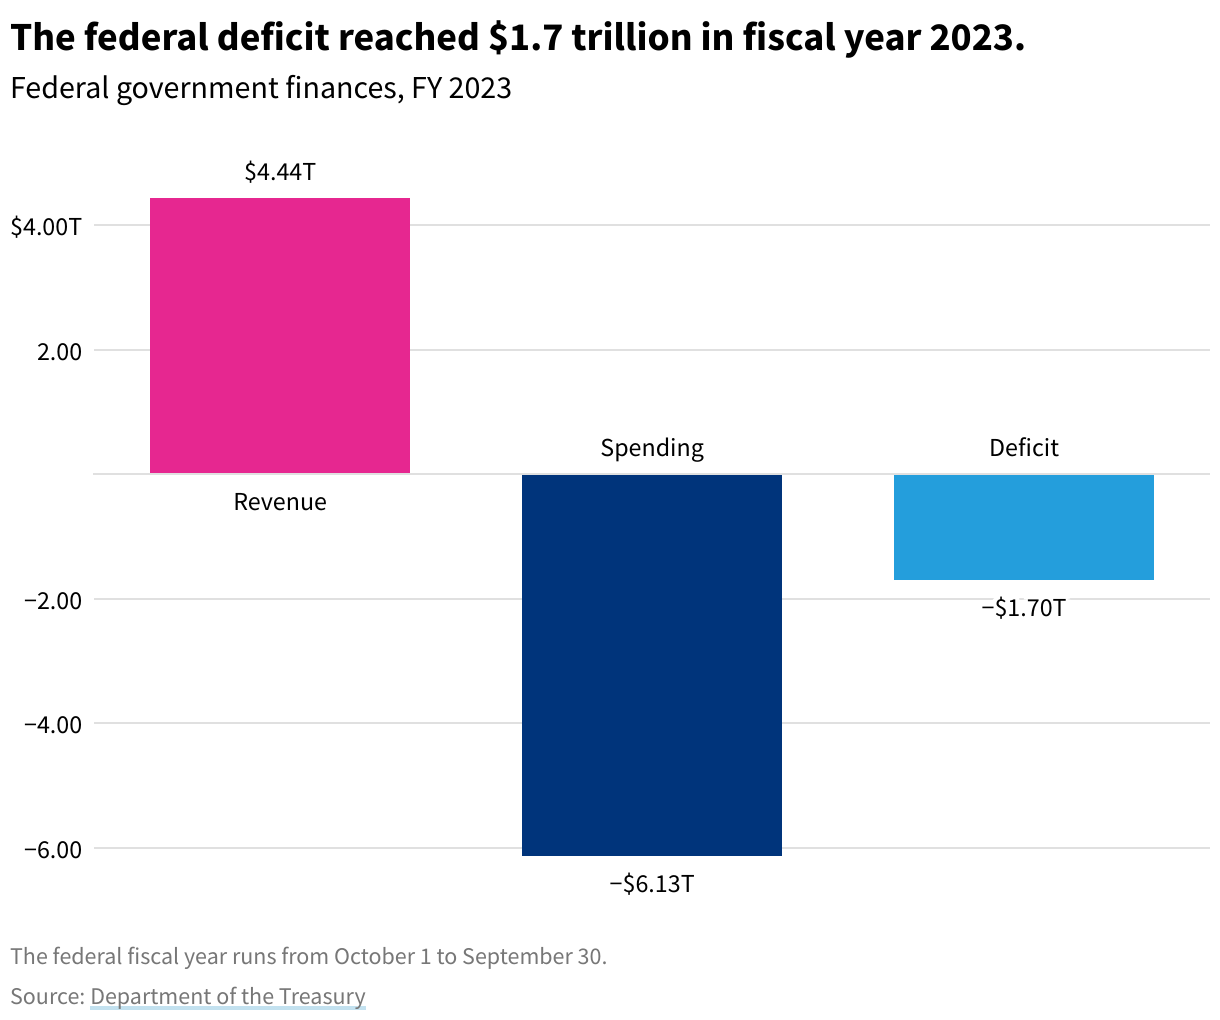 Bar chart showing national spending ($6.13 trillion), revenue ($4.44 trillion), and deficit ($1.70 trillion) in fiscal year 2023. 